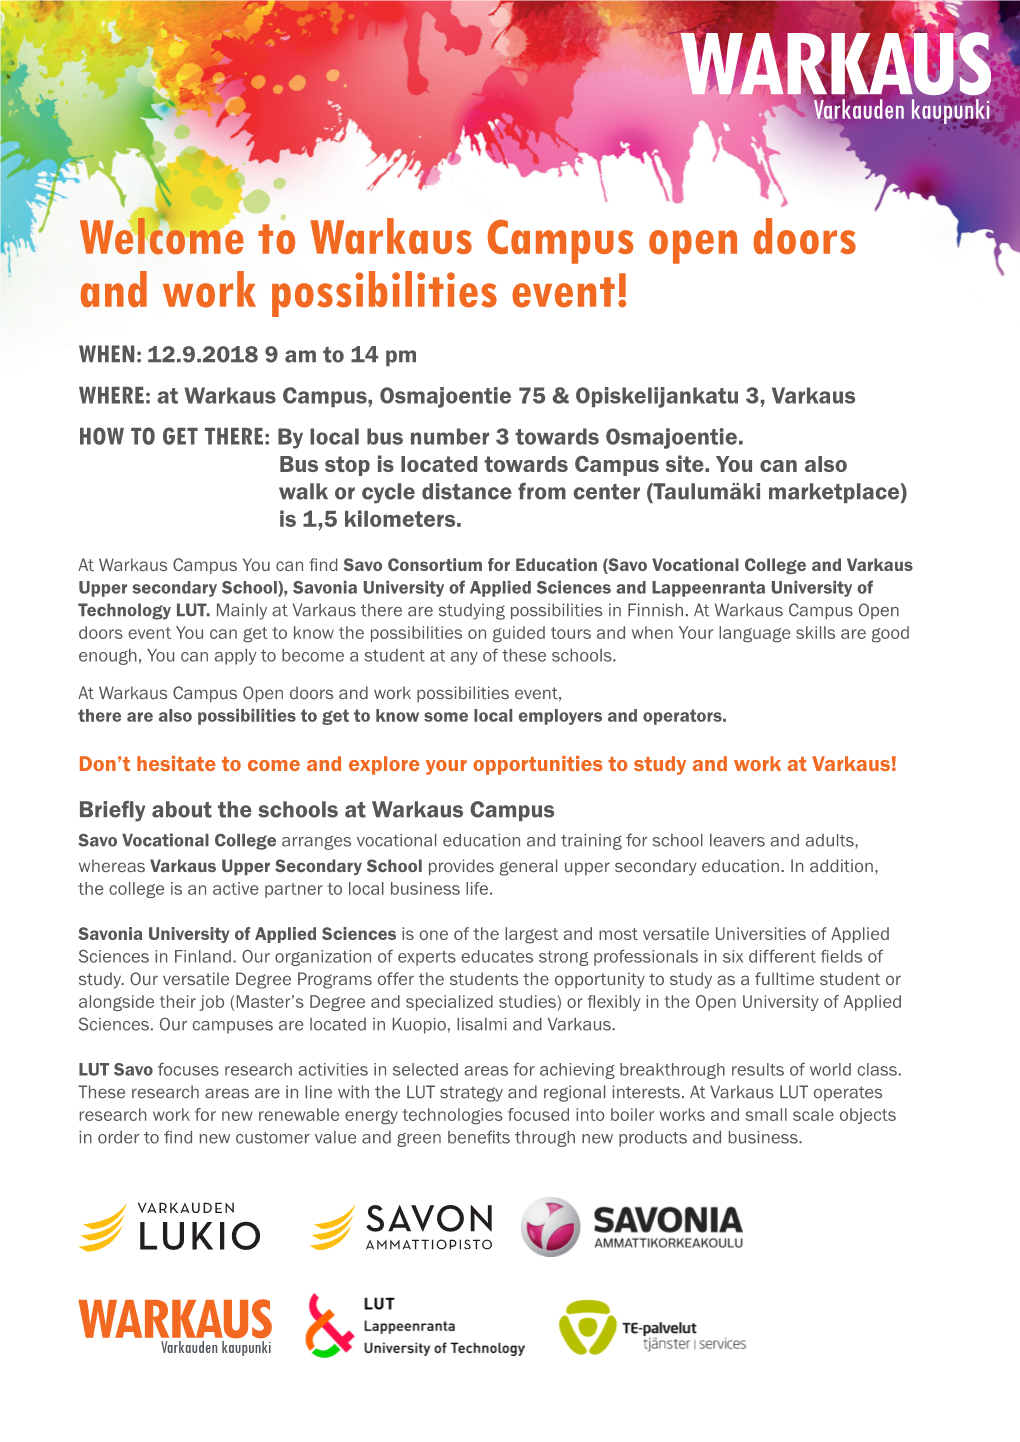 Welcome to Warkaus Campus Open Doors and Work Possibilities Event!